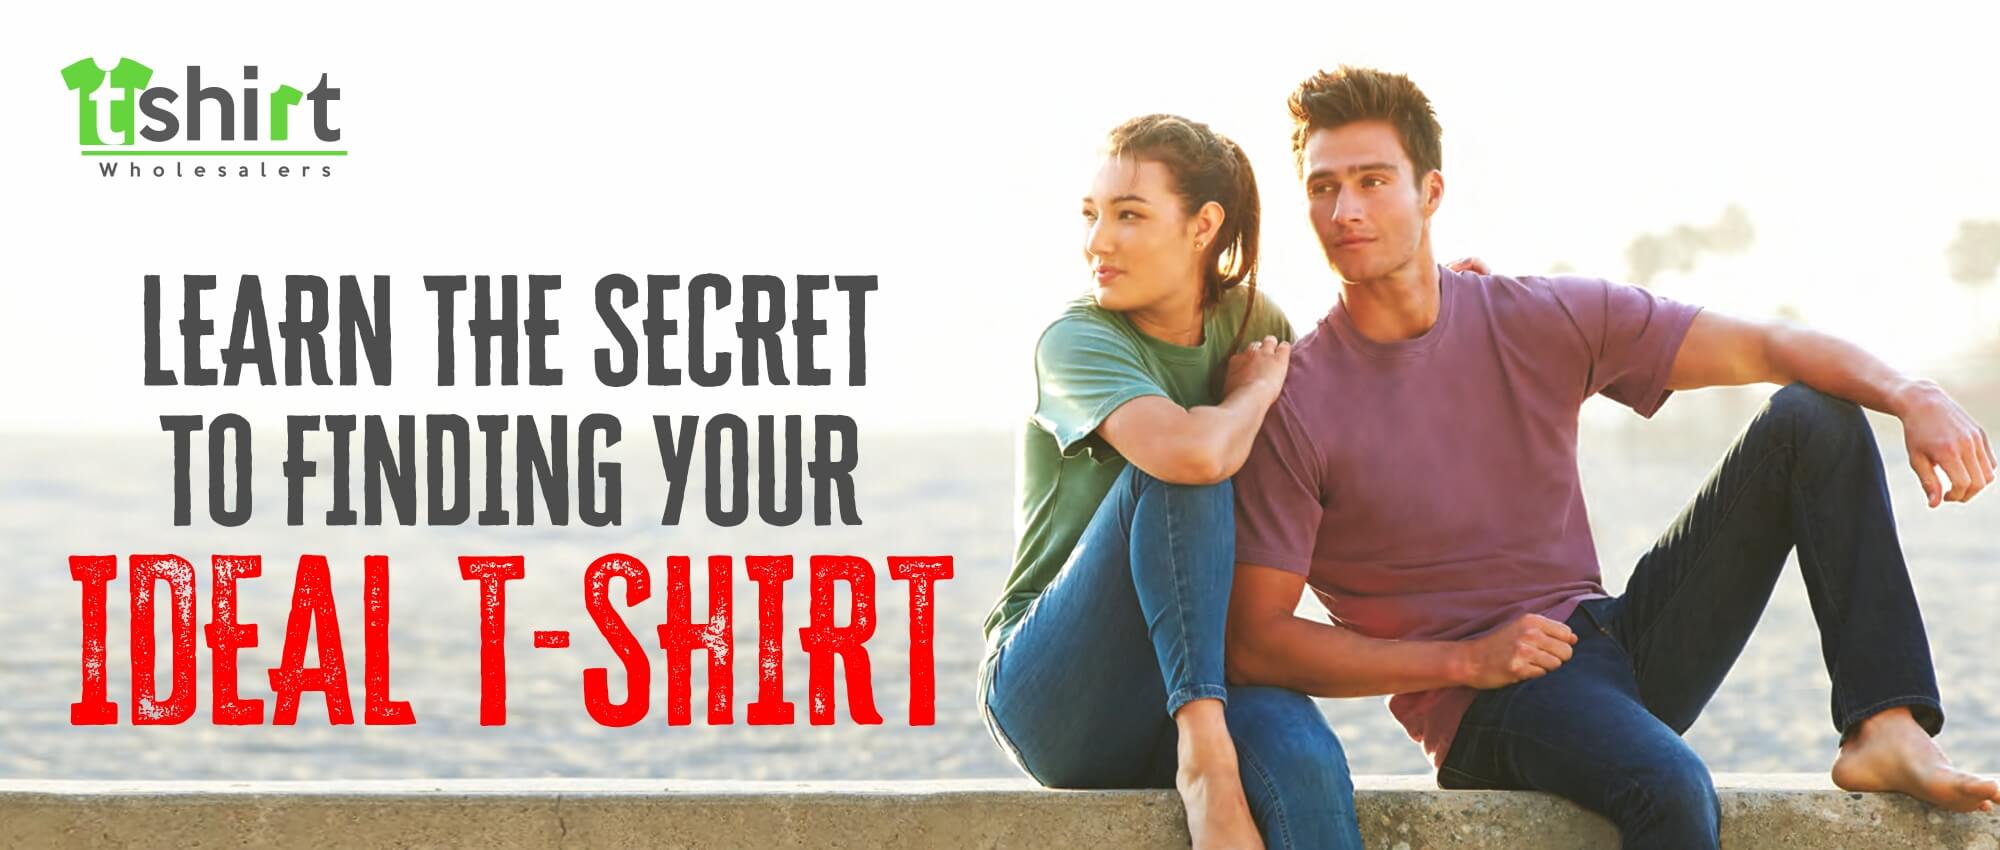 LEARN THE SECRET TO FINDING YOUR IDEAL T-SHIRT